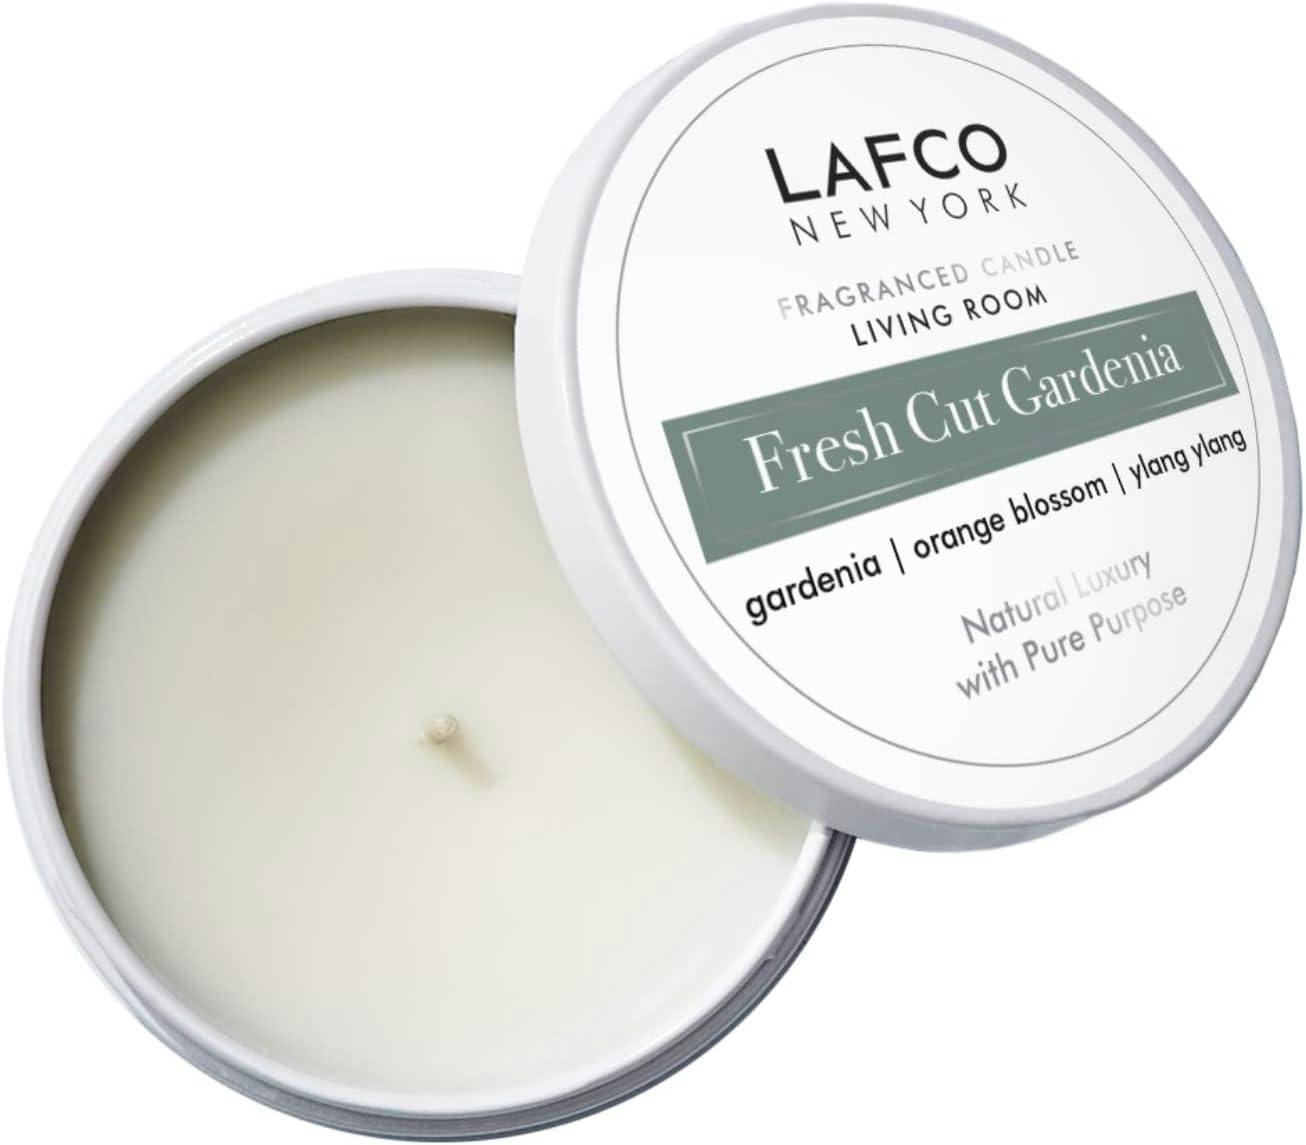 Gardenia Bliss White Soy Travel Candle with Non-Toxic Clean Burn